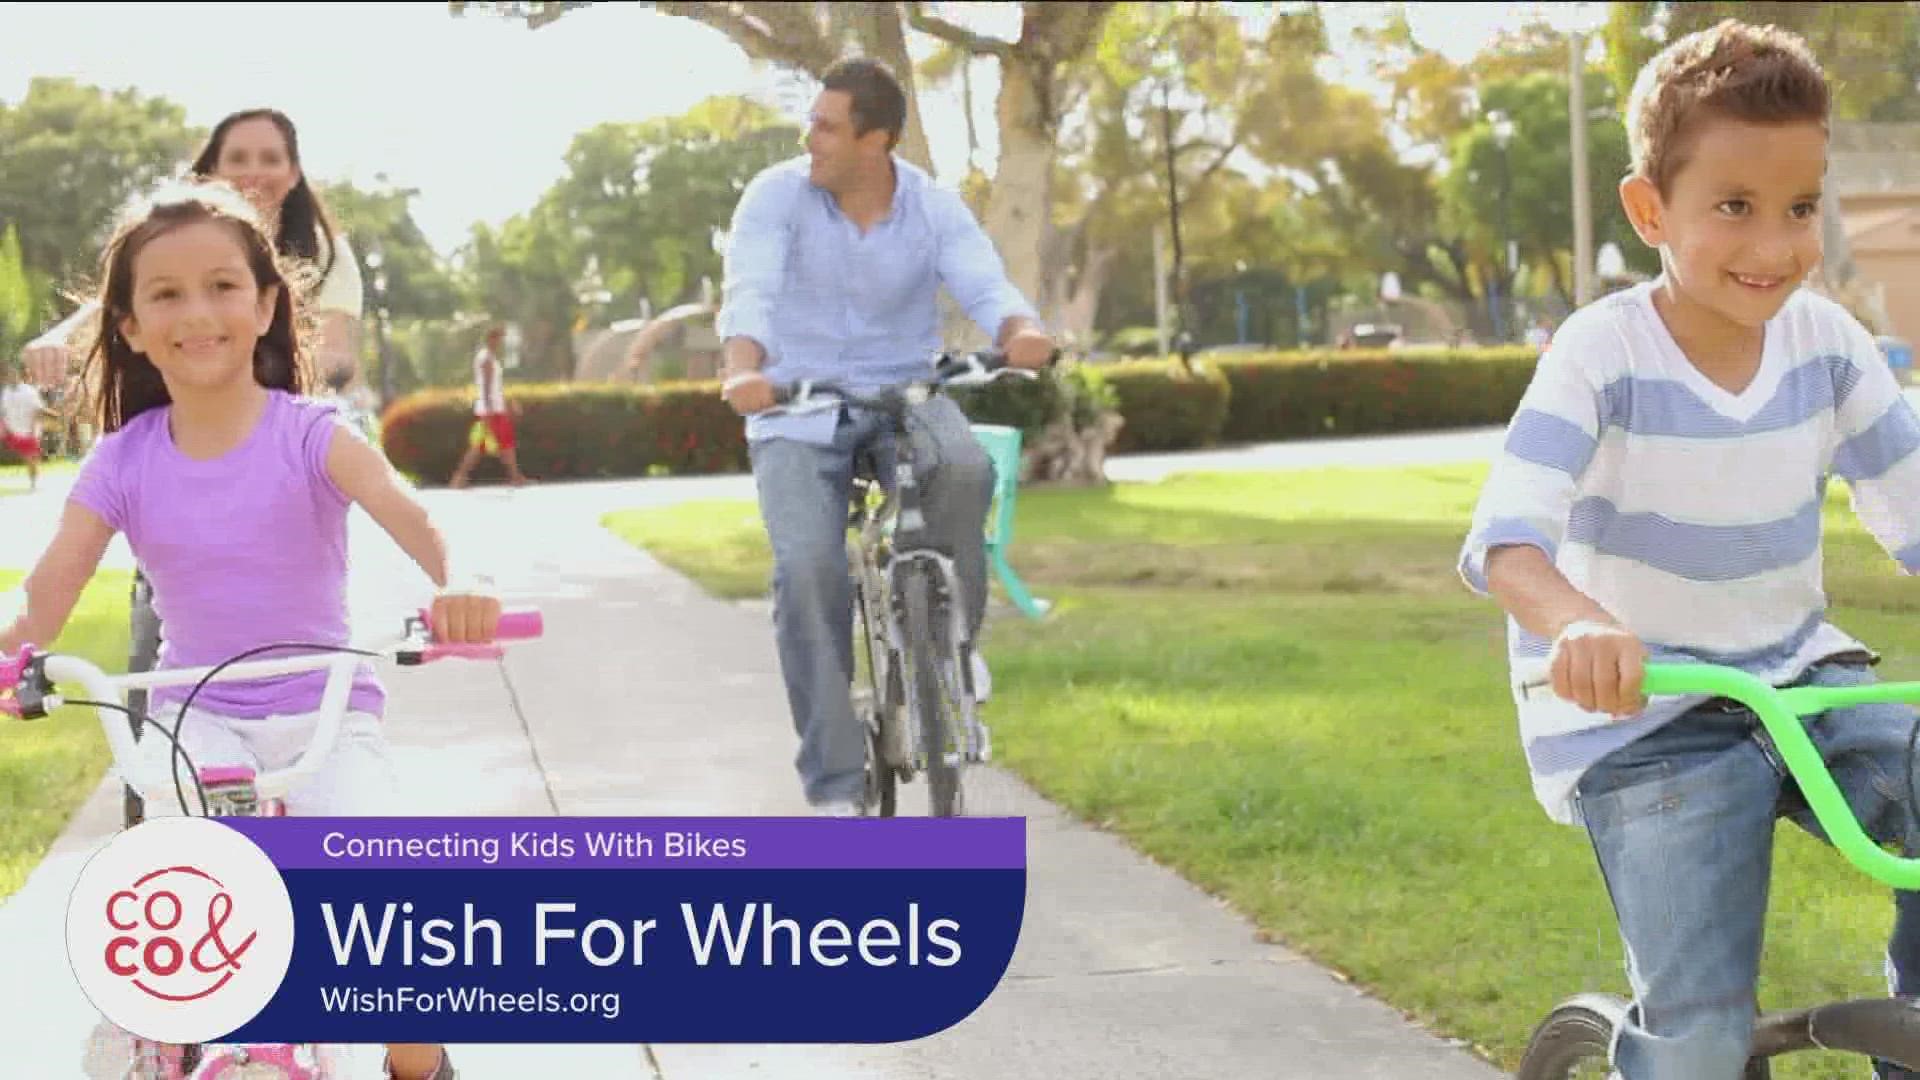 Wish for Wheels gives new bikes and helmets to underserved kids. Support them by becoming a corporate partner or give individually. Learn more at WishForWheels.org.